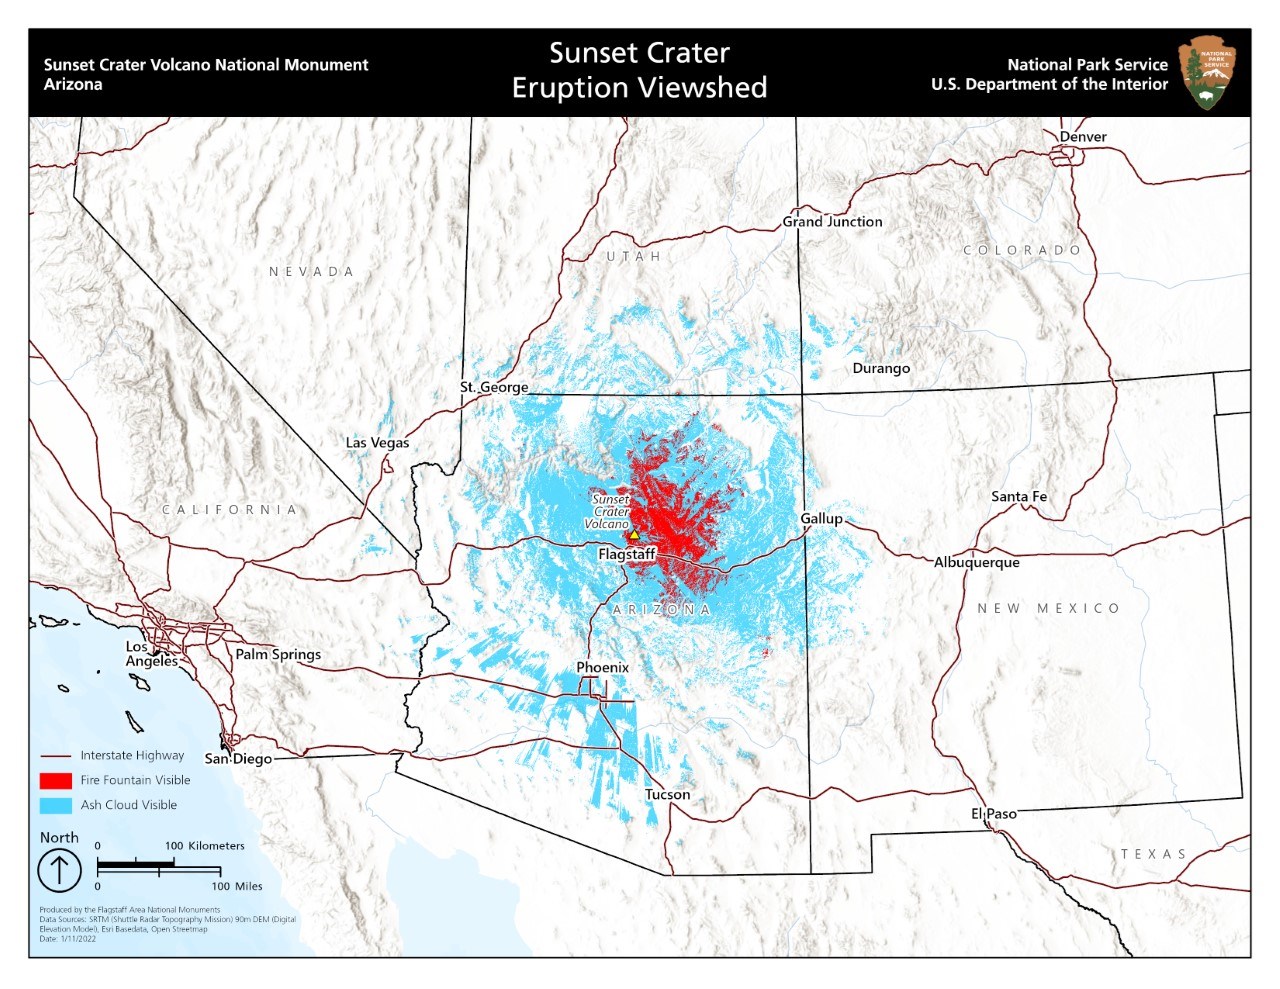 Map of the southwest showing areas from which the Sunset Crater eruption could have been seen. Viewshed is marked in blue (visible ash cloud) and red (visible lava)